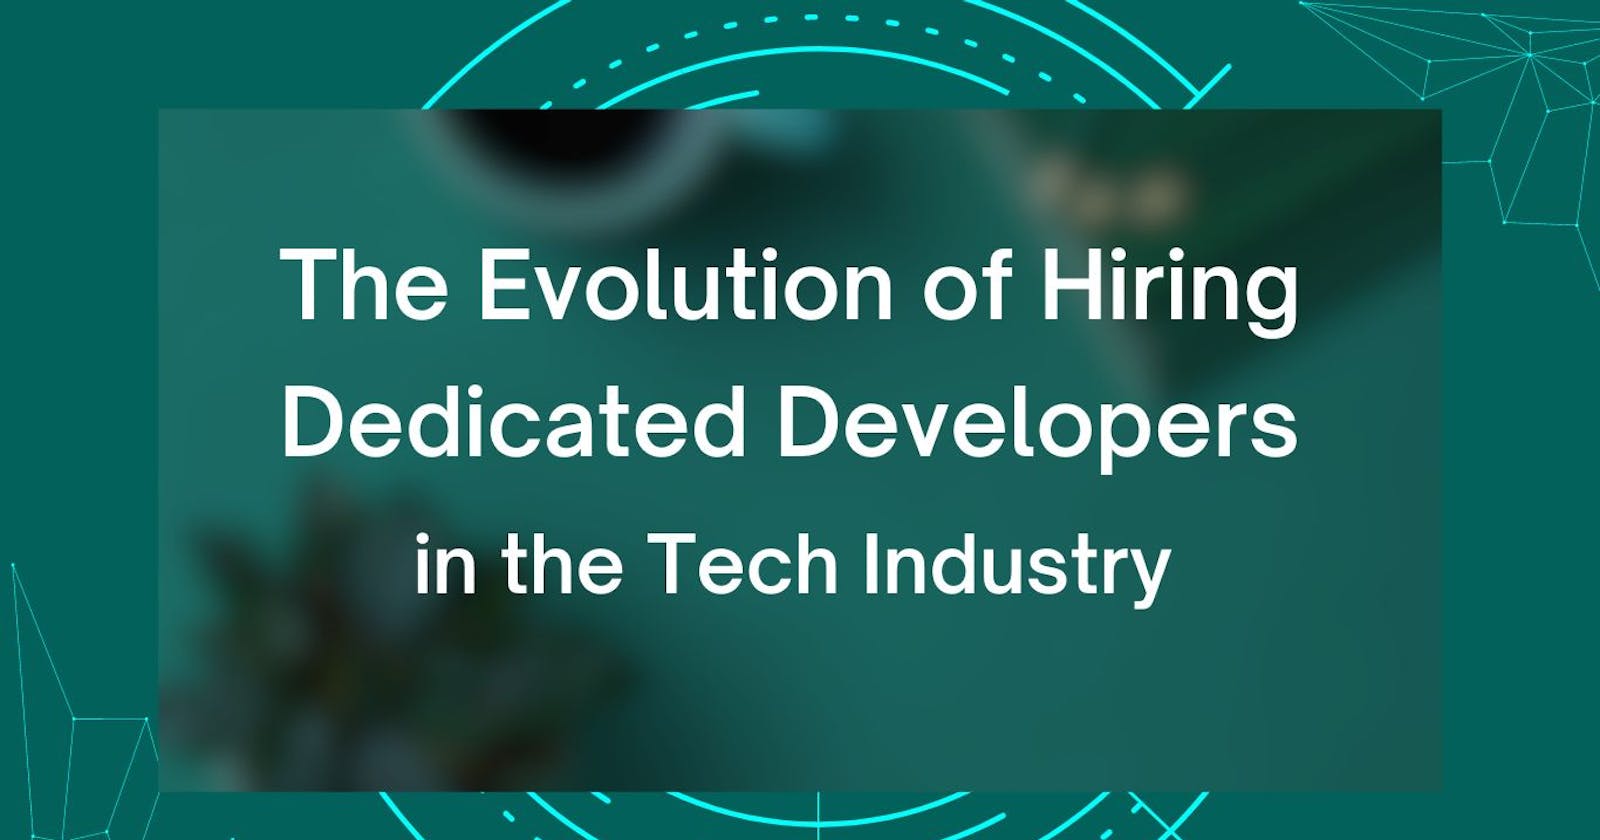 Future Trends: The Evolution of Hiring Dedicated Developers in the Tech Industry